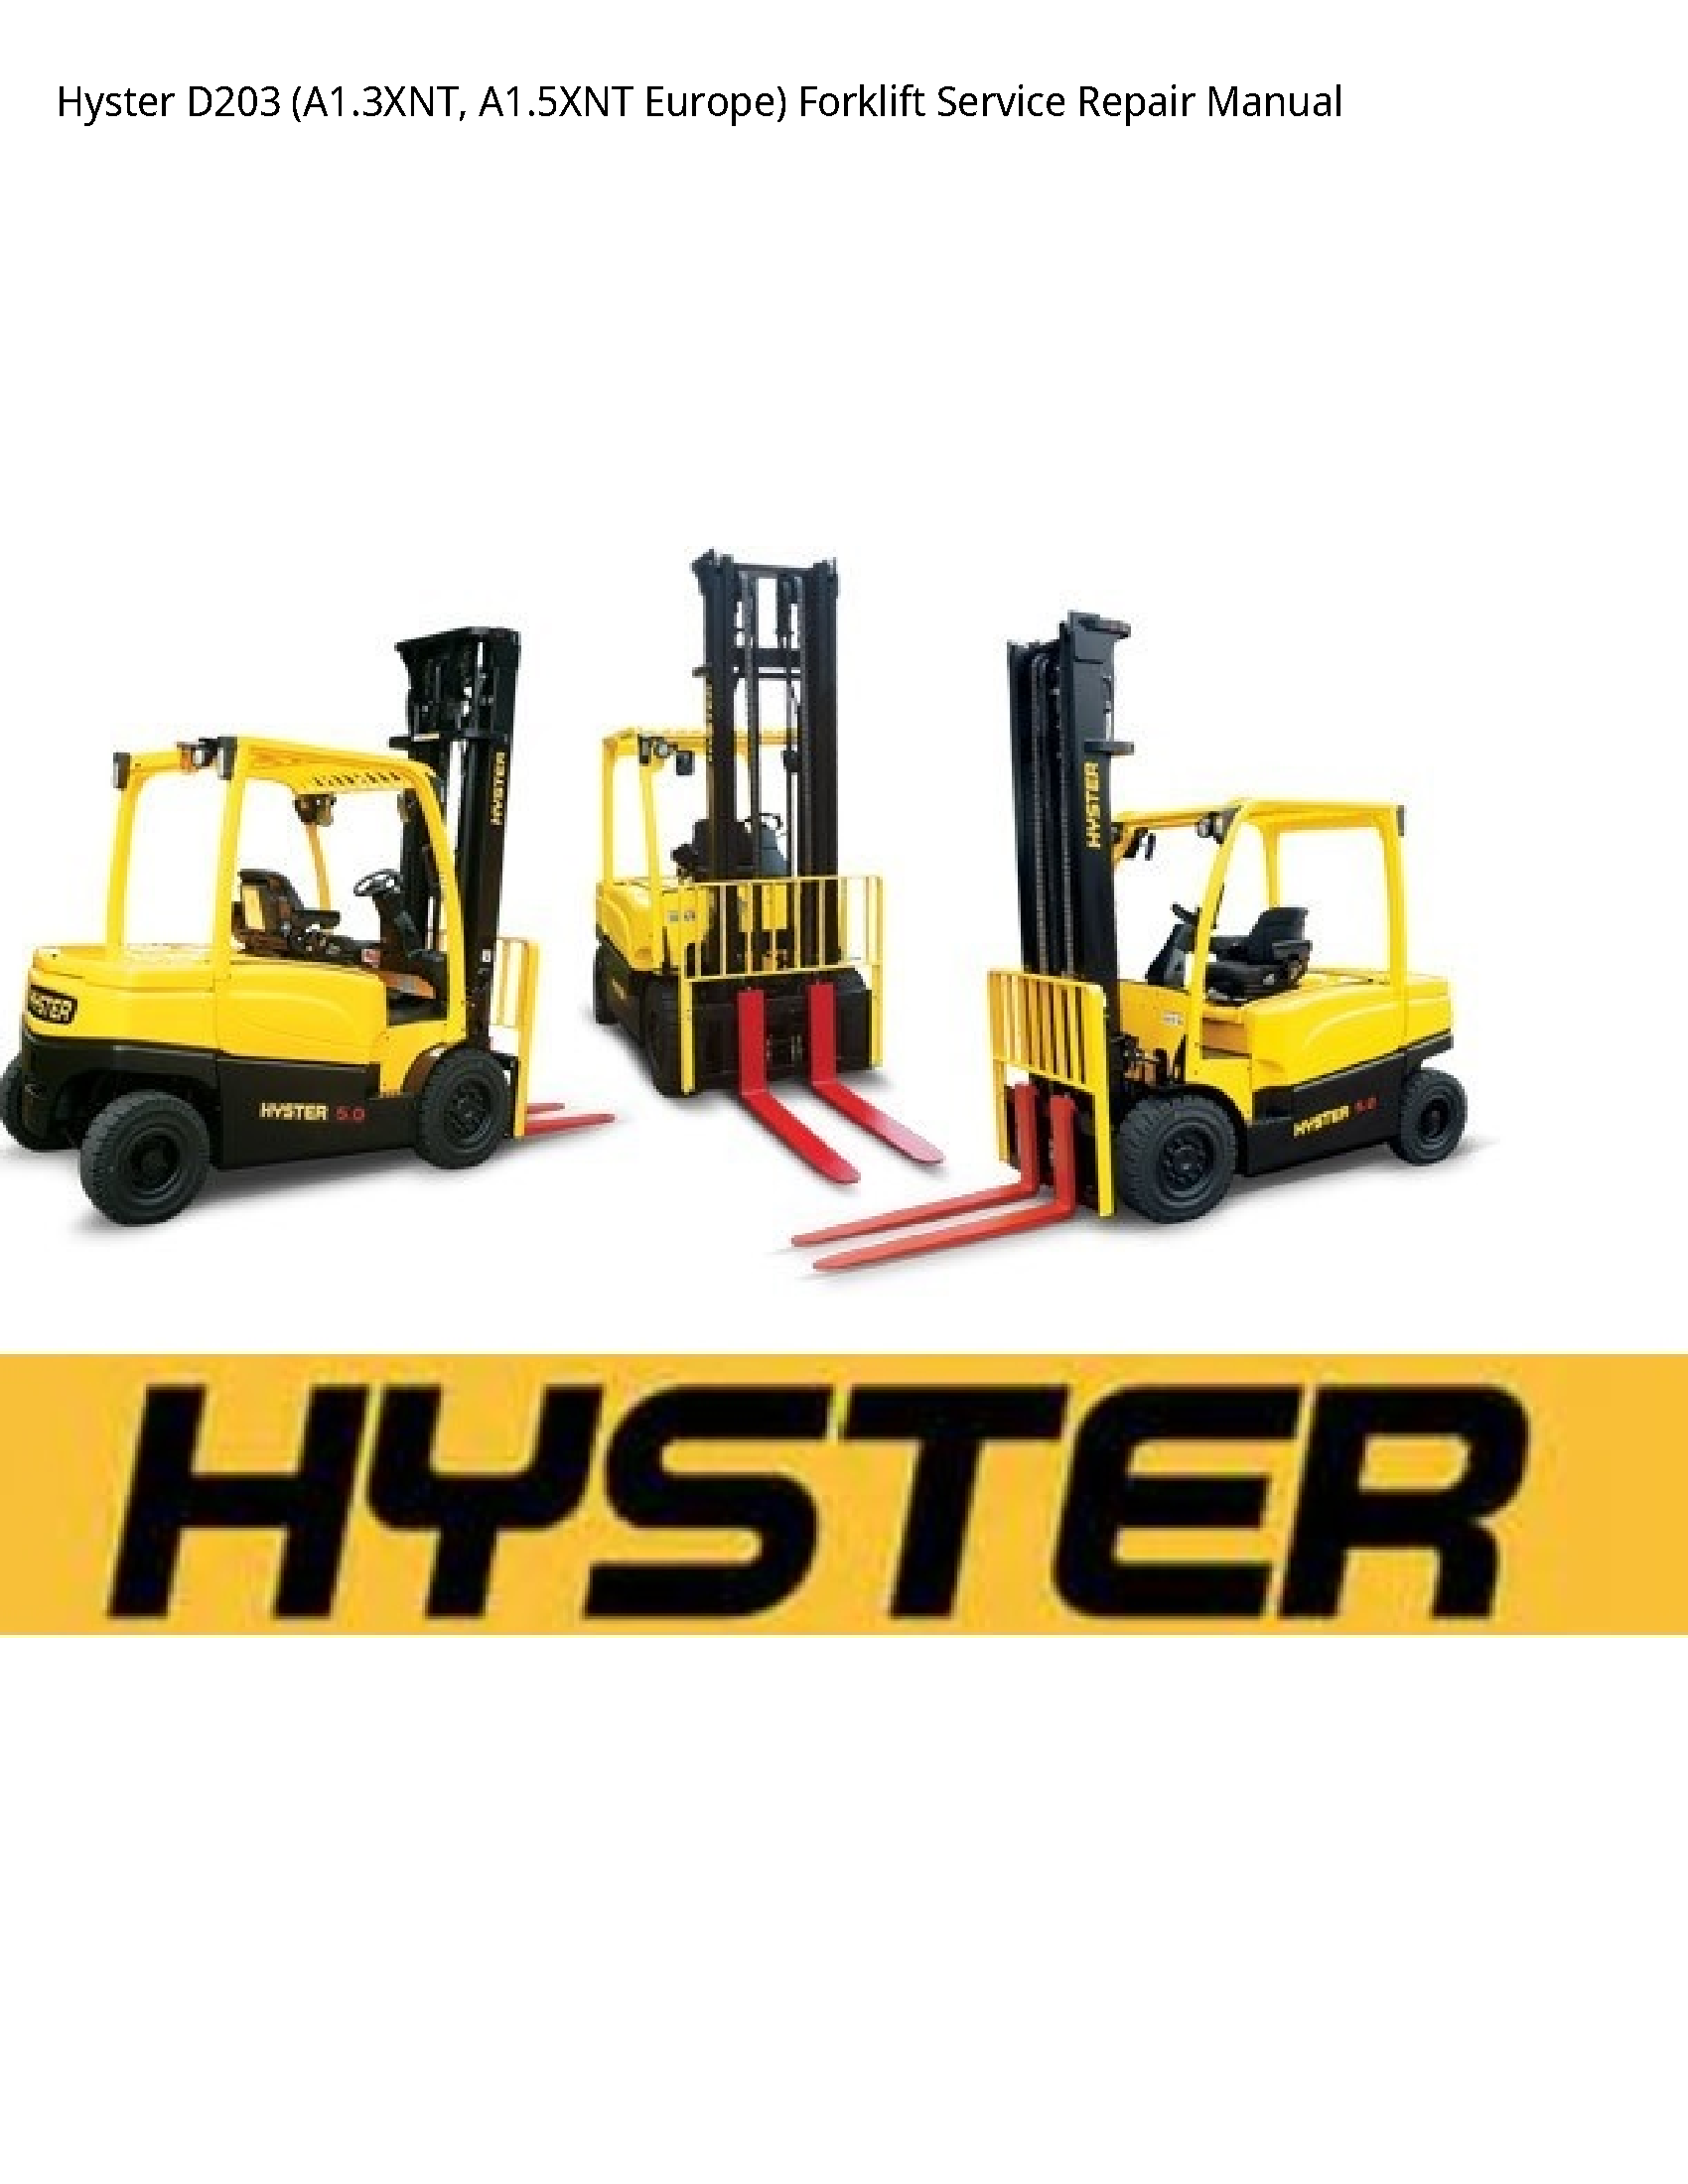 Hyster D203 Europe) Forklift manual